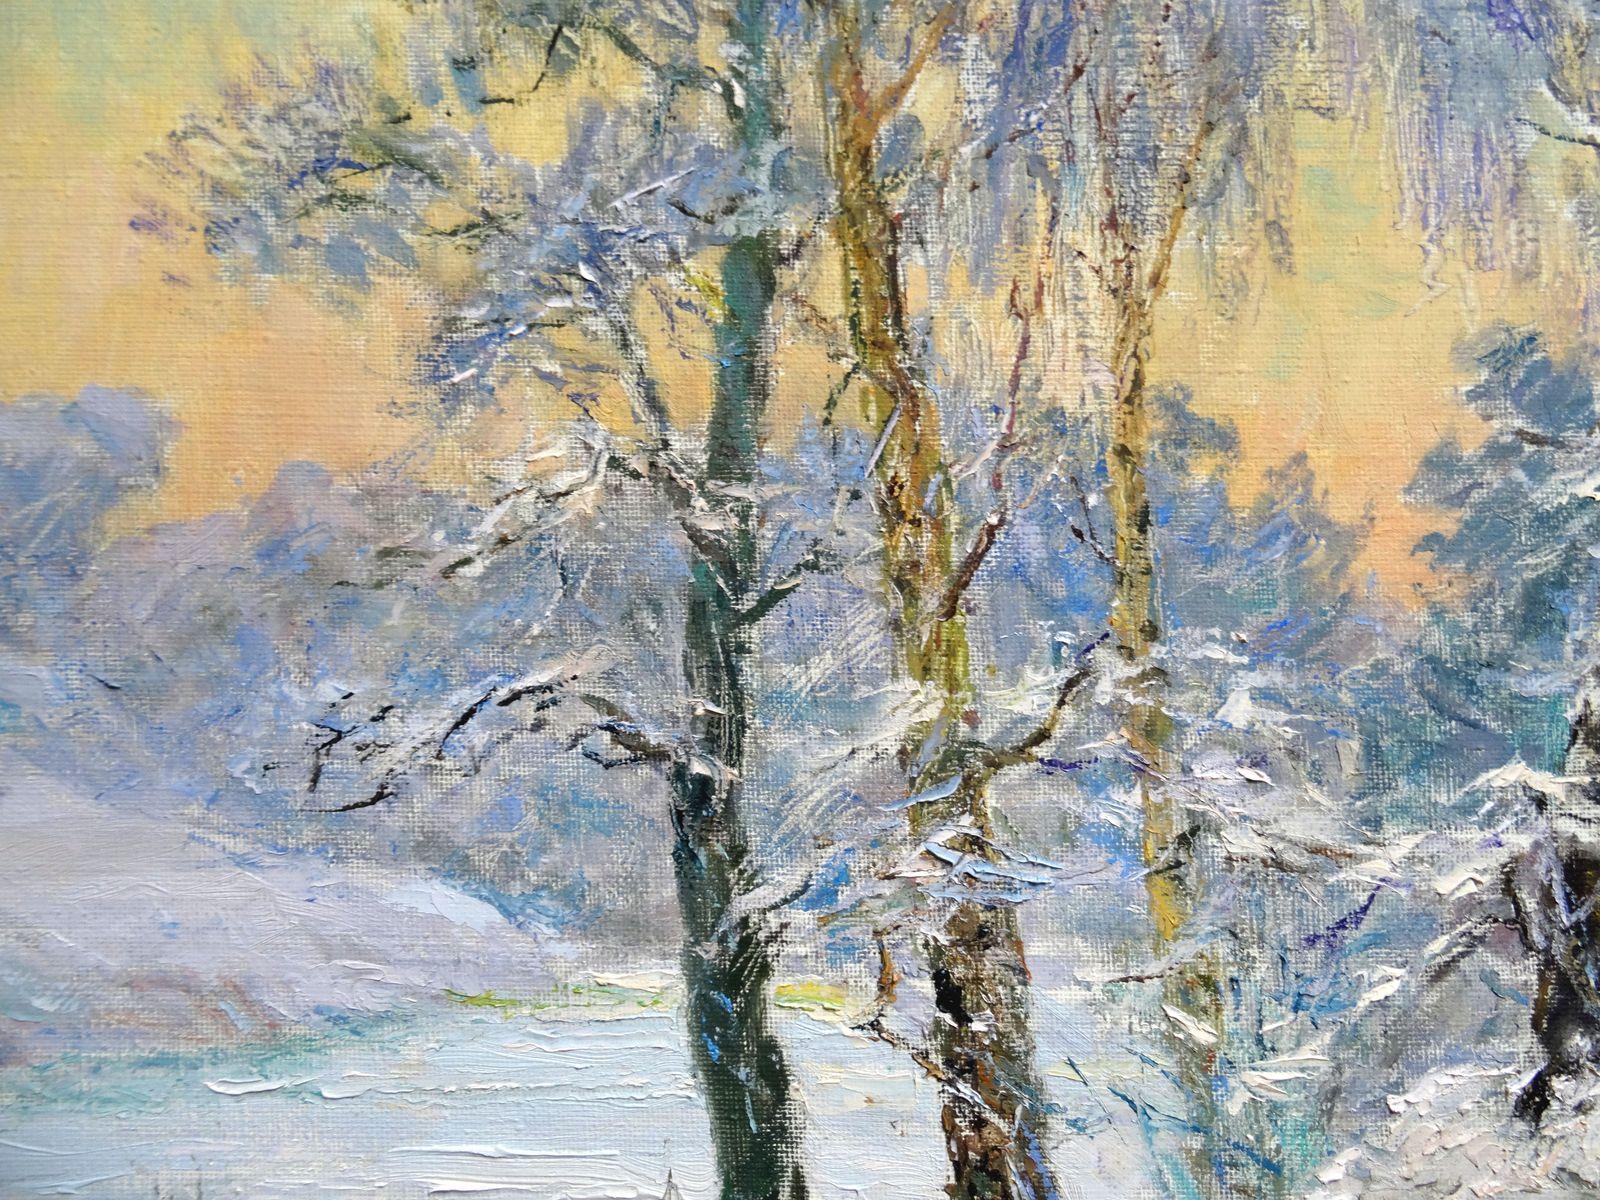 Winter. Oil on canvas, 60x80 cm - Painting by Arnolds Pankoks